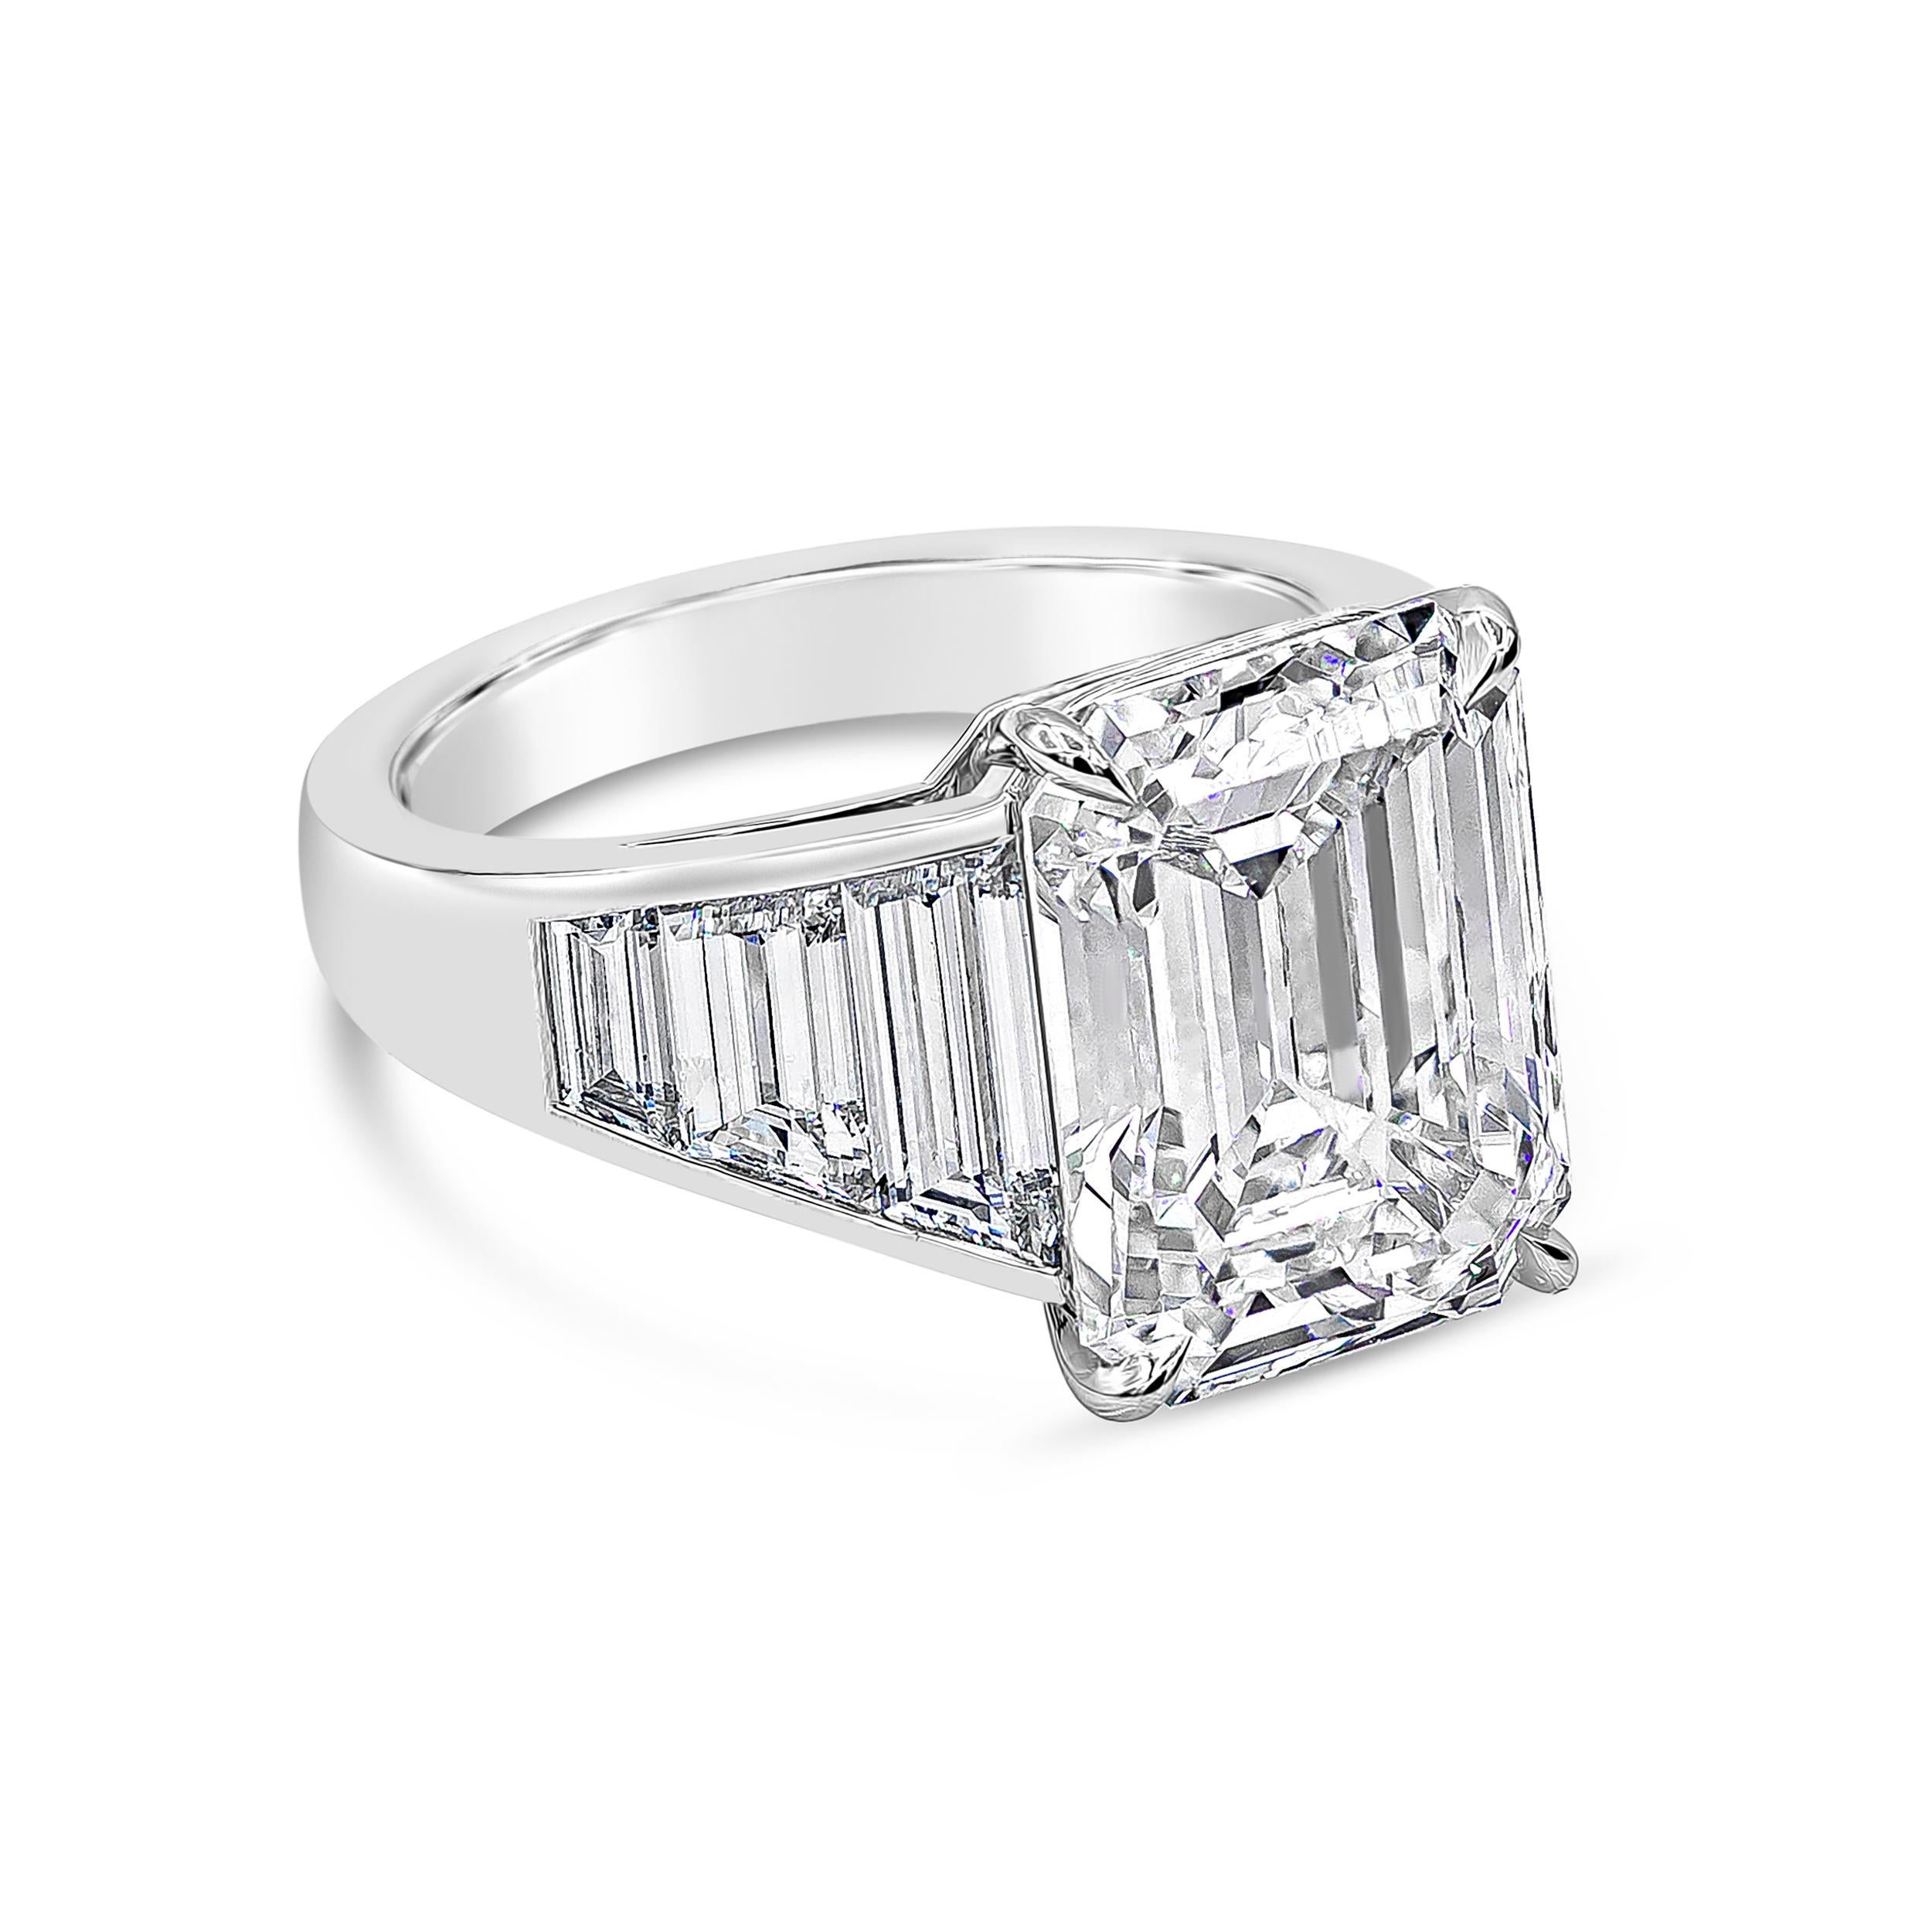 A stunning well-crafted engagement ring showcasing 8.35 carats emerald cut diamond certified by GIA as H color and VVS2 in clarity. Flanking the center diamond are perfectly matched graduating trapezoid diamonds weighing 2.81 carats total. Channel